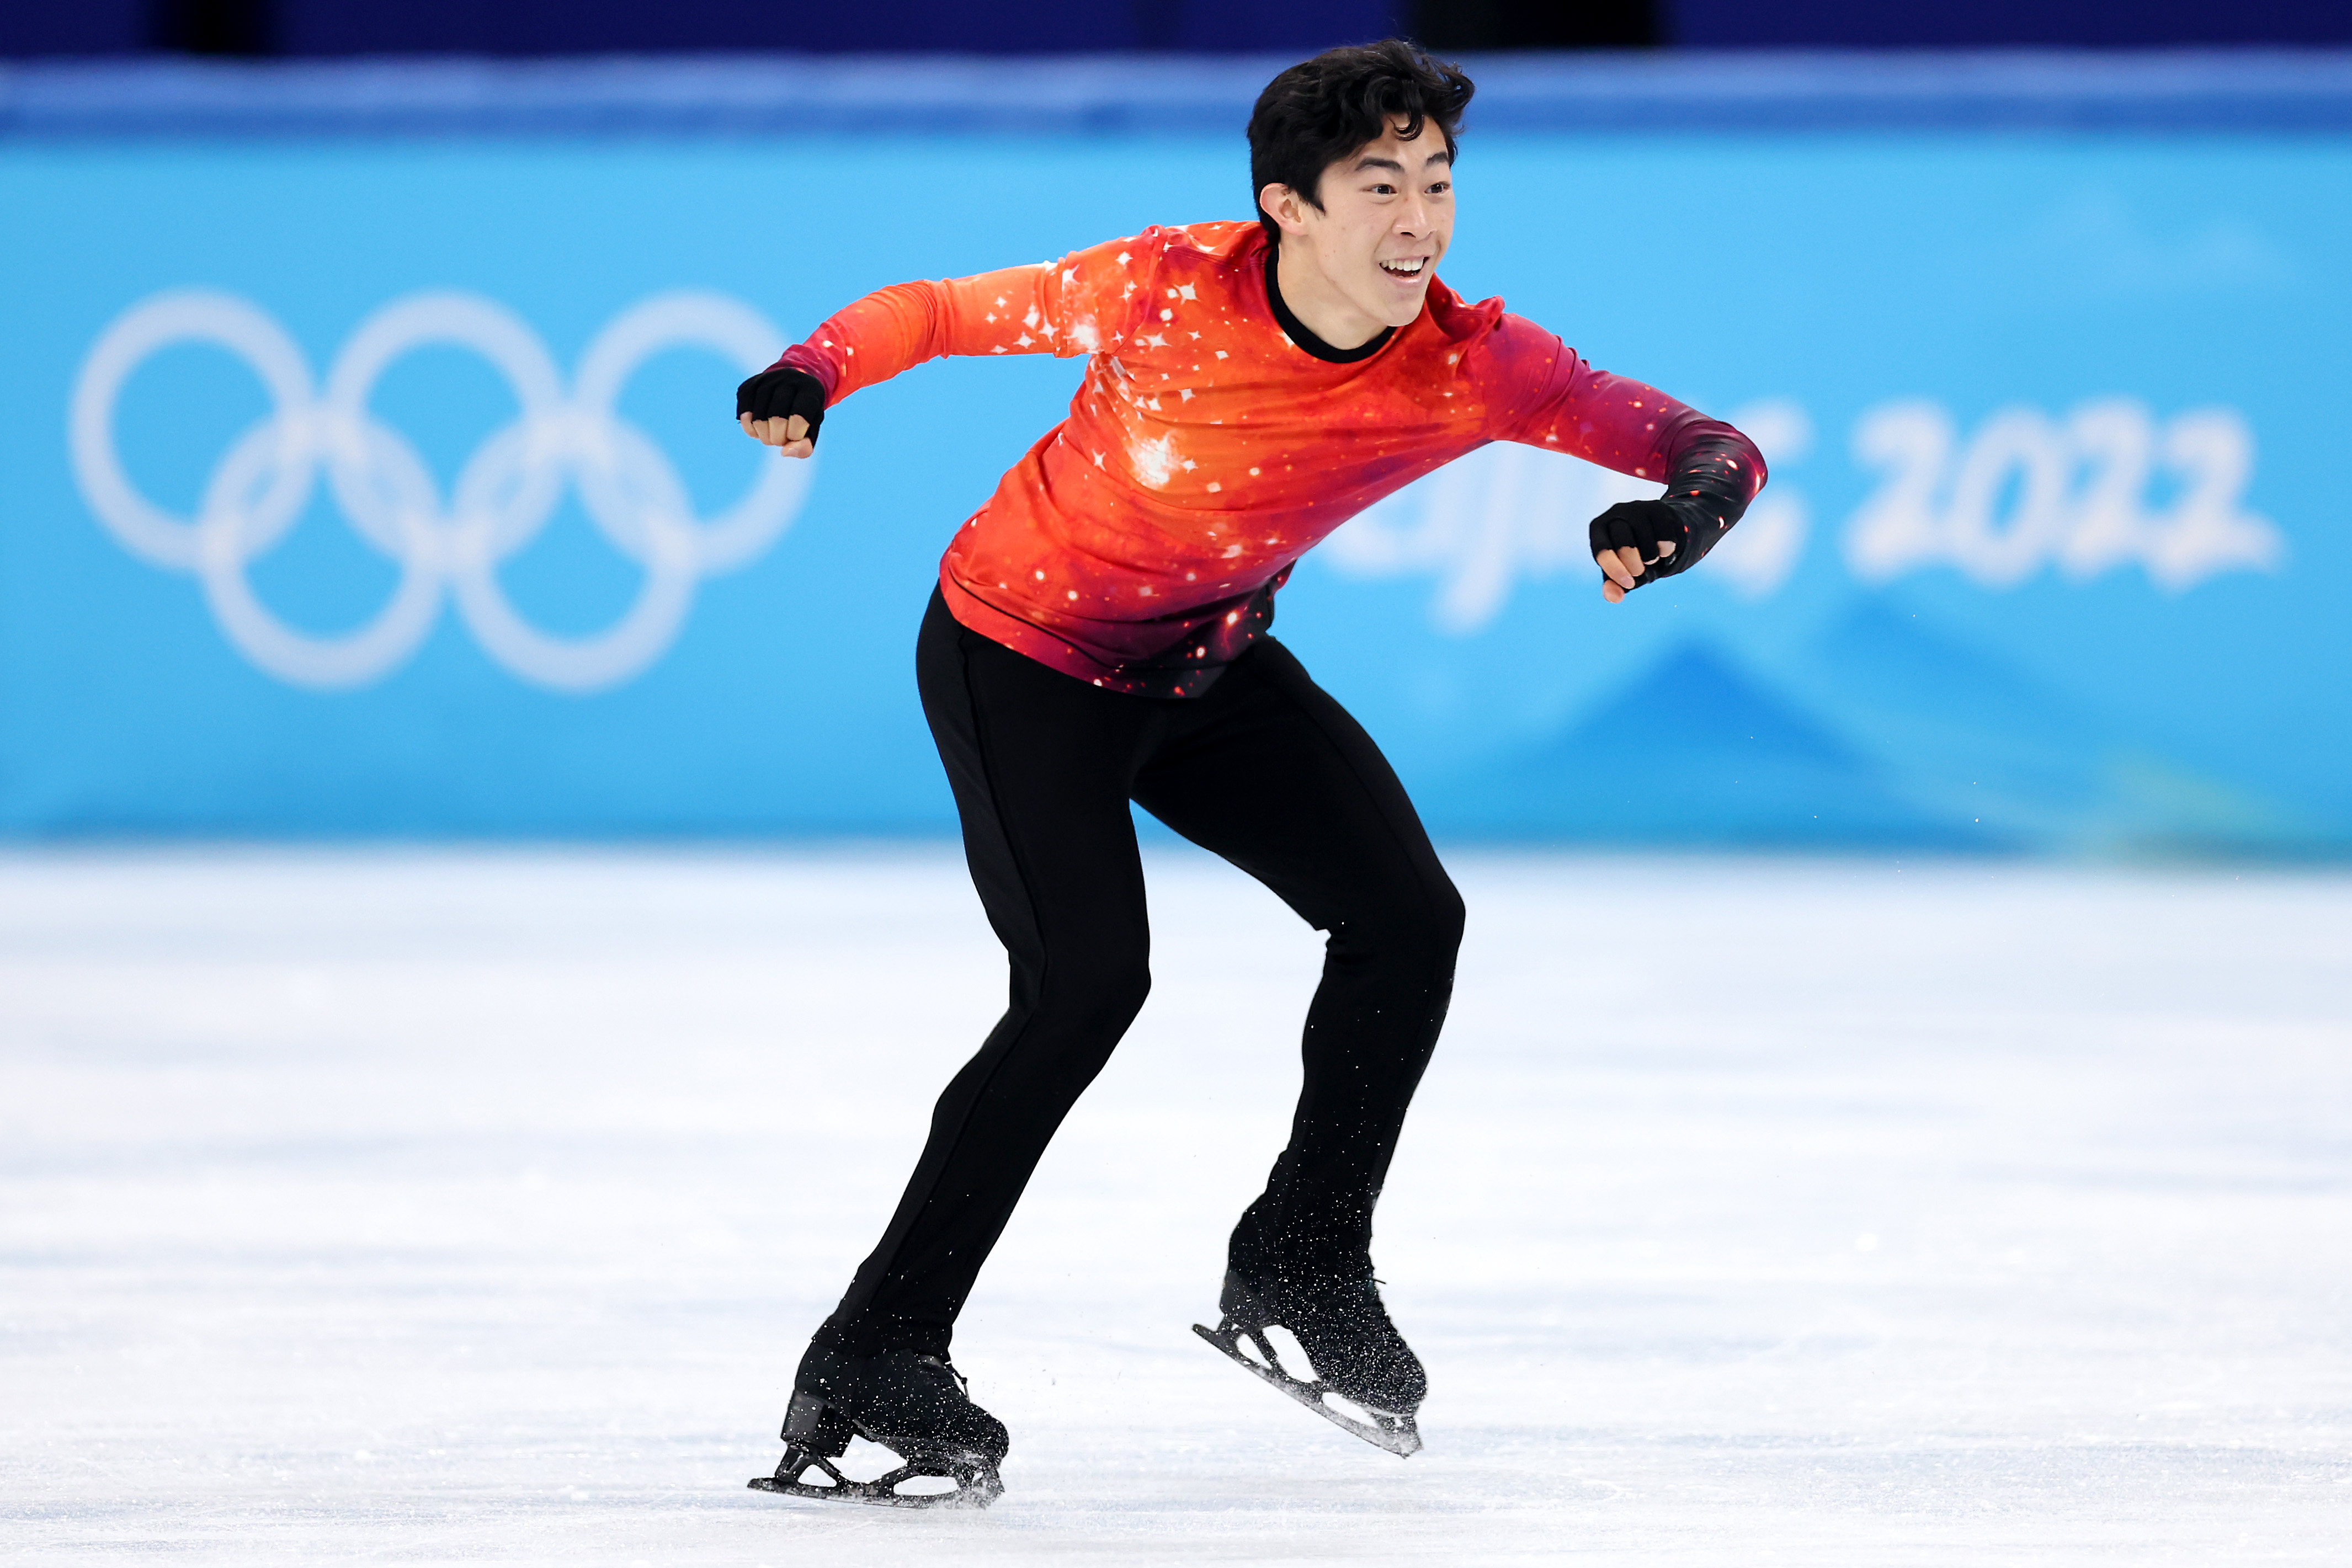 Watch Nathan Chen's Impressive Gold Medal Performance to ‘Rocket Man' in Olympic Free Skate